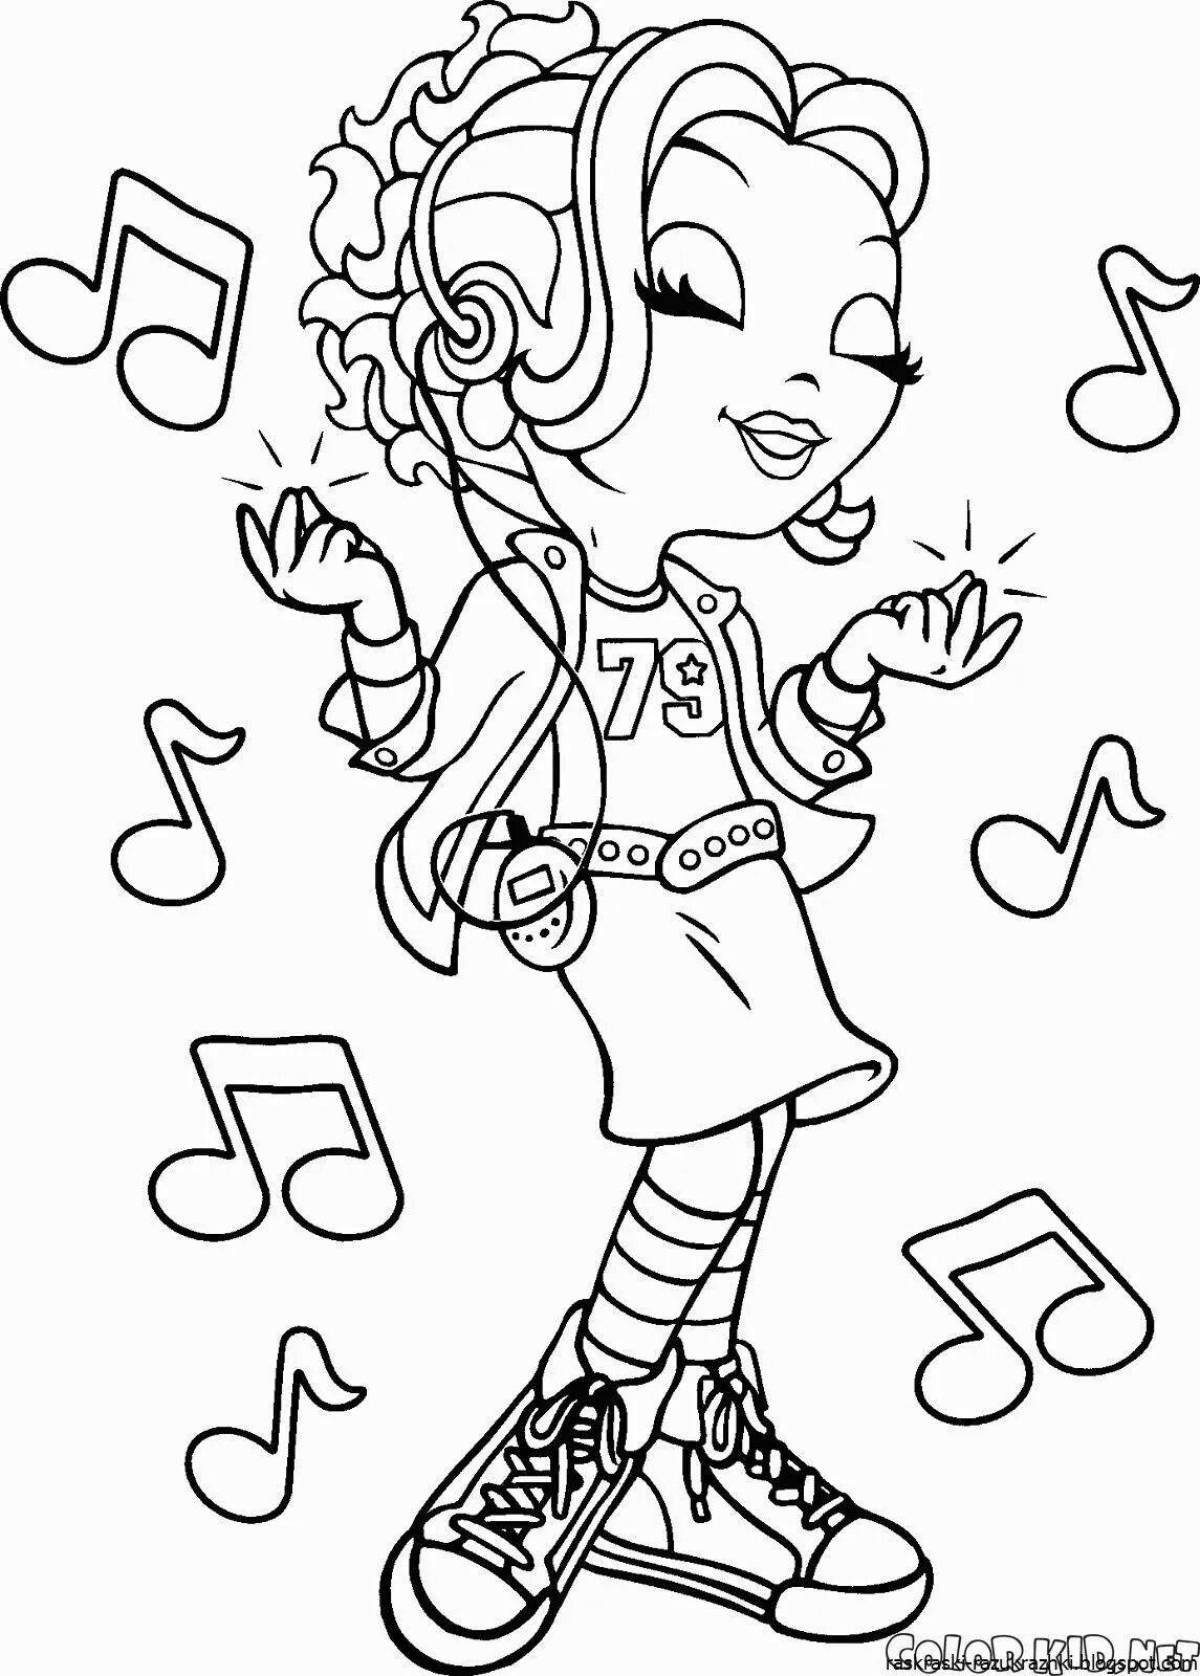 Coloring pages for girls 12 years old